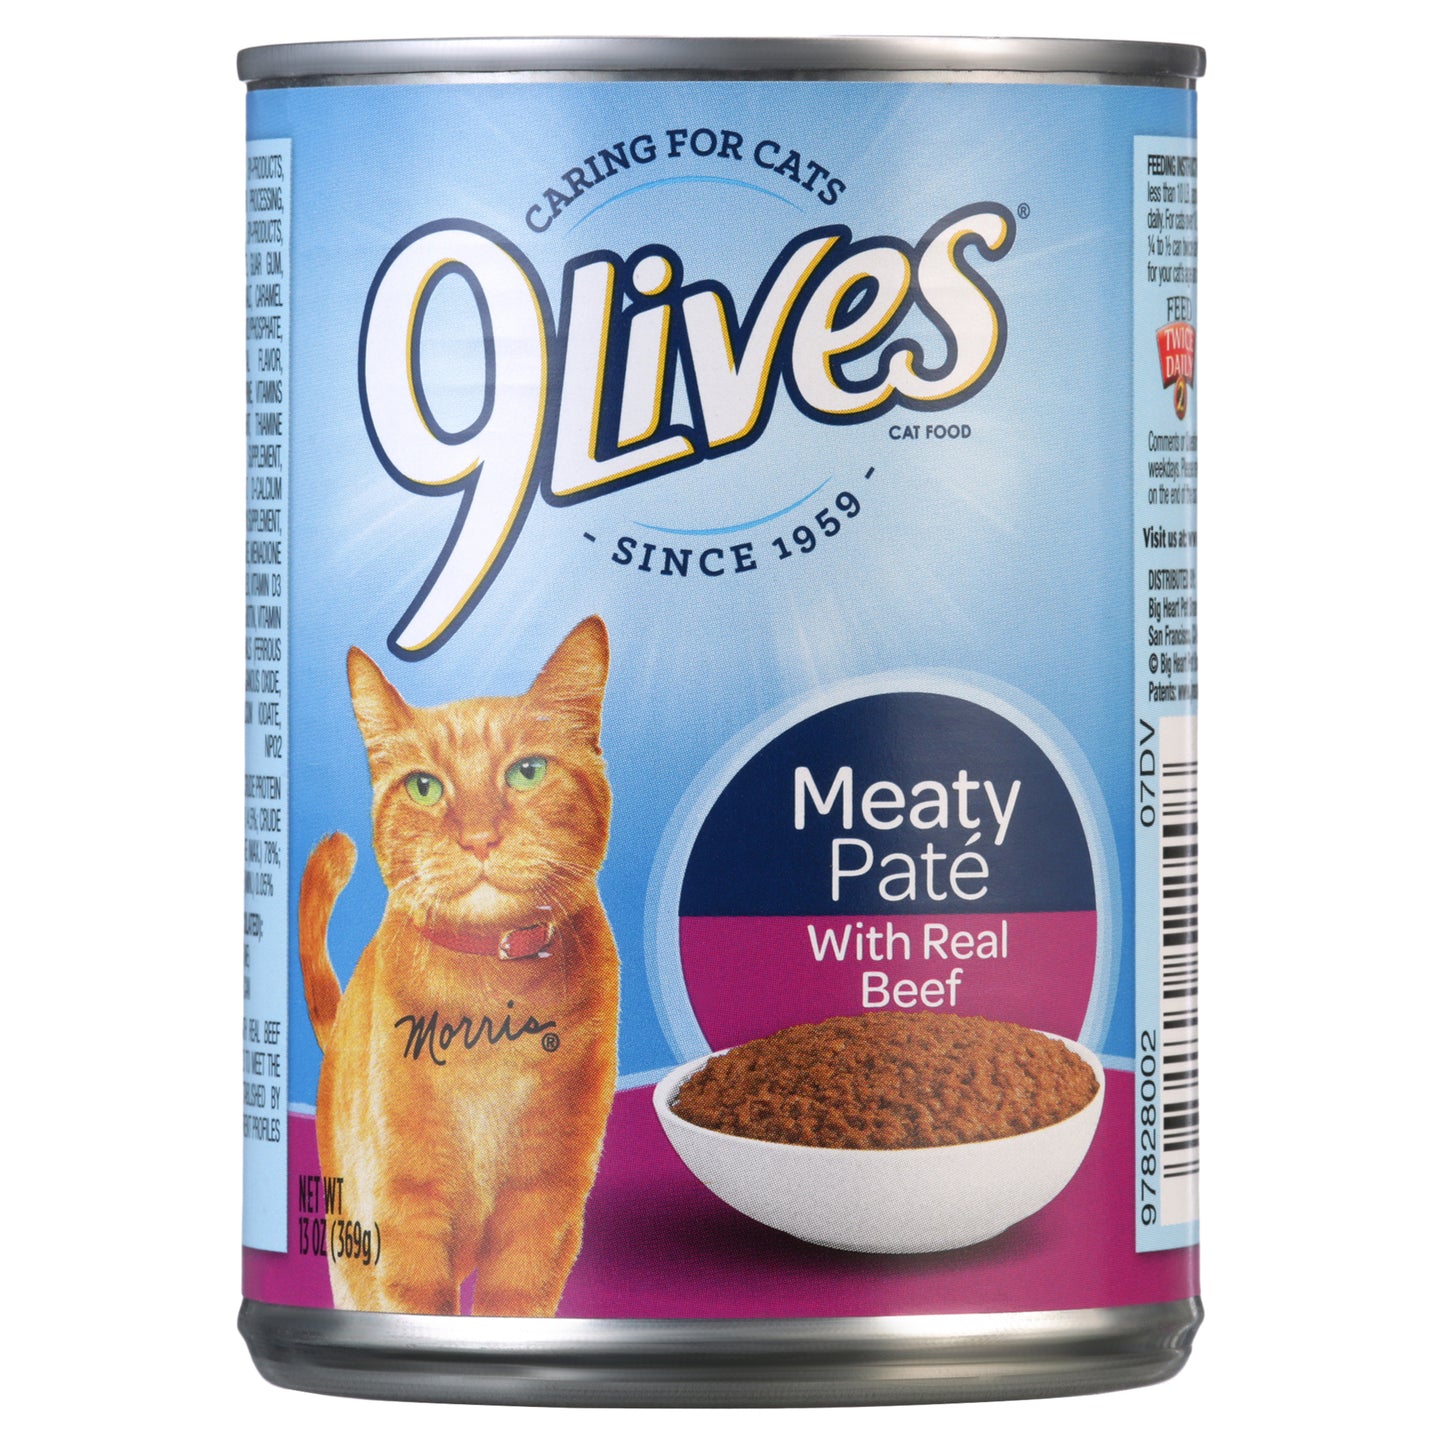 (12 Pack) 9Lives Meaty Paté With Real Chicken & Tuna Wet Cat Food, 13 oz. Cans